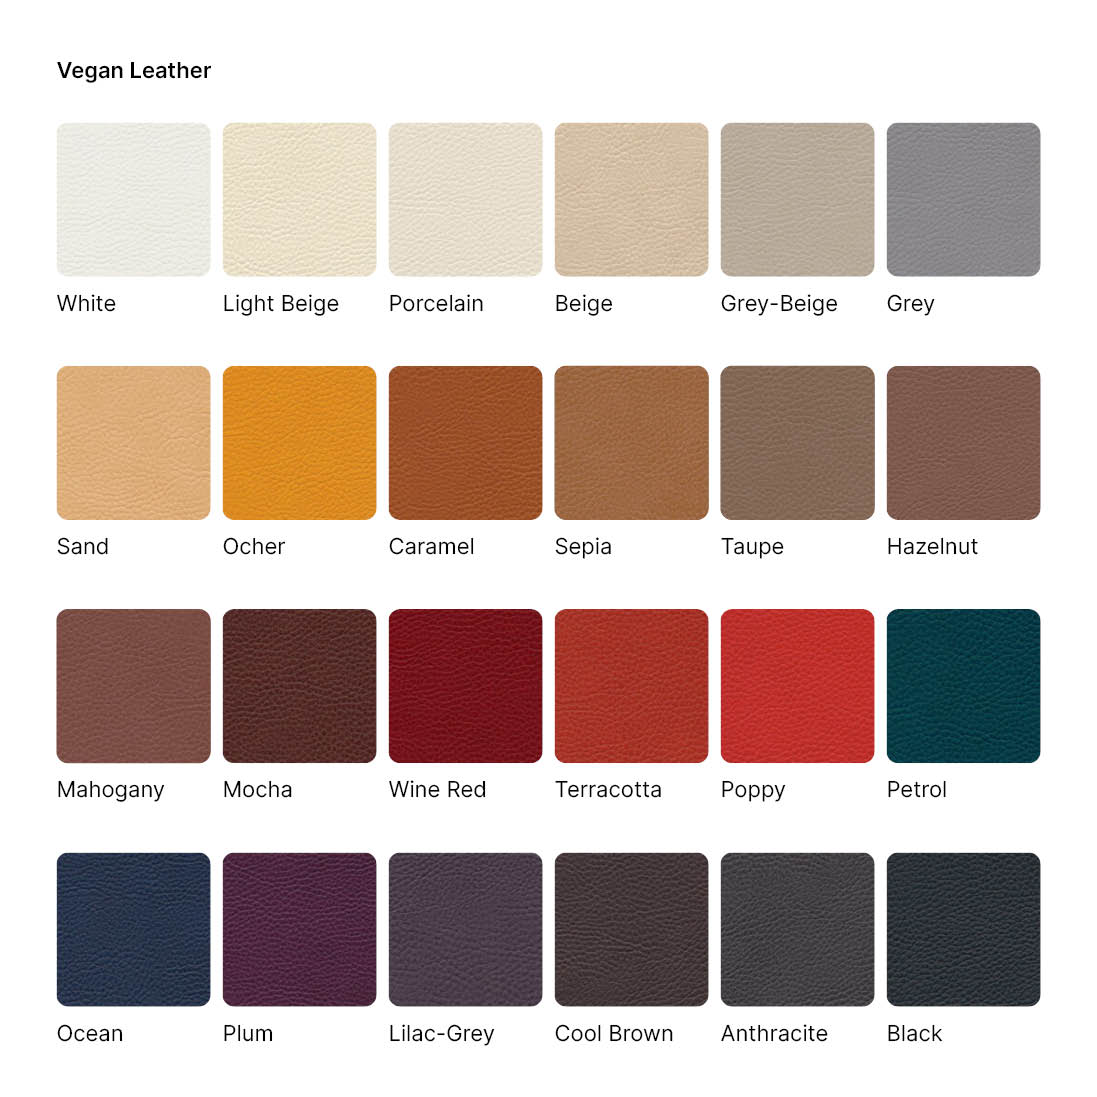 Vegan Leather in 24 colors